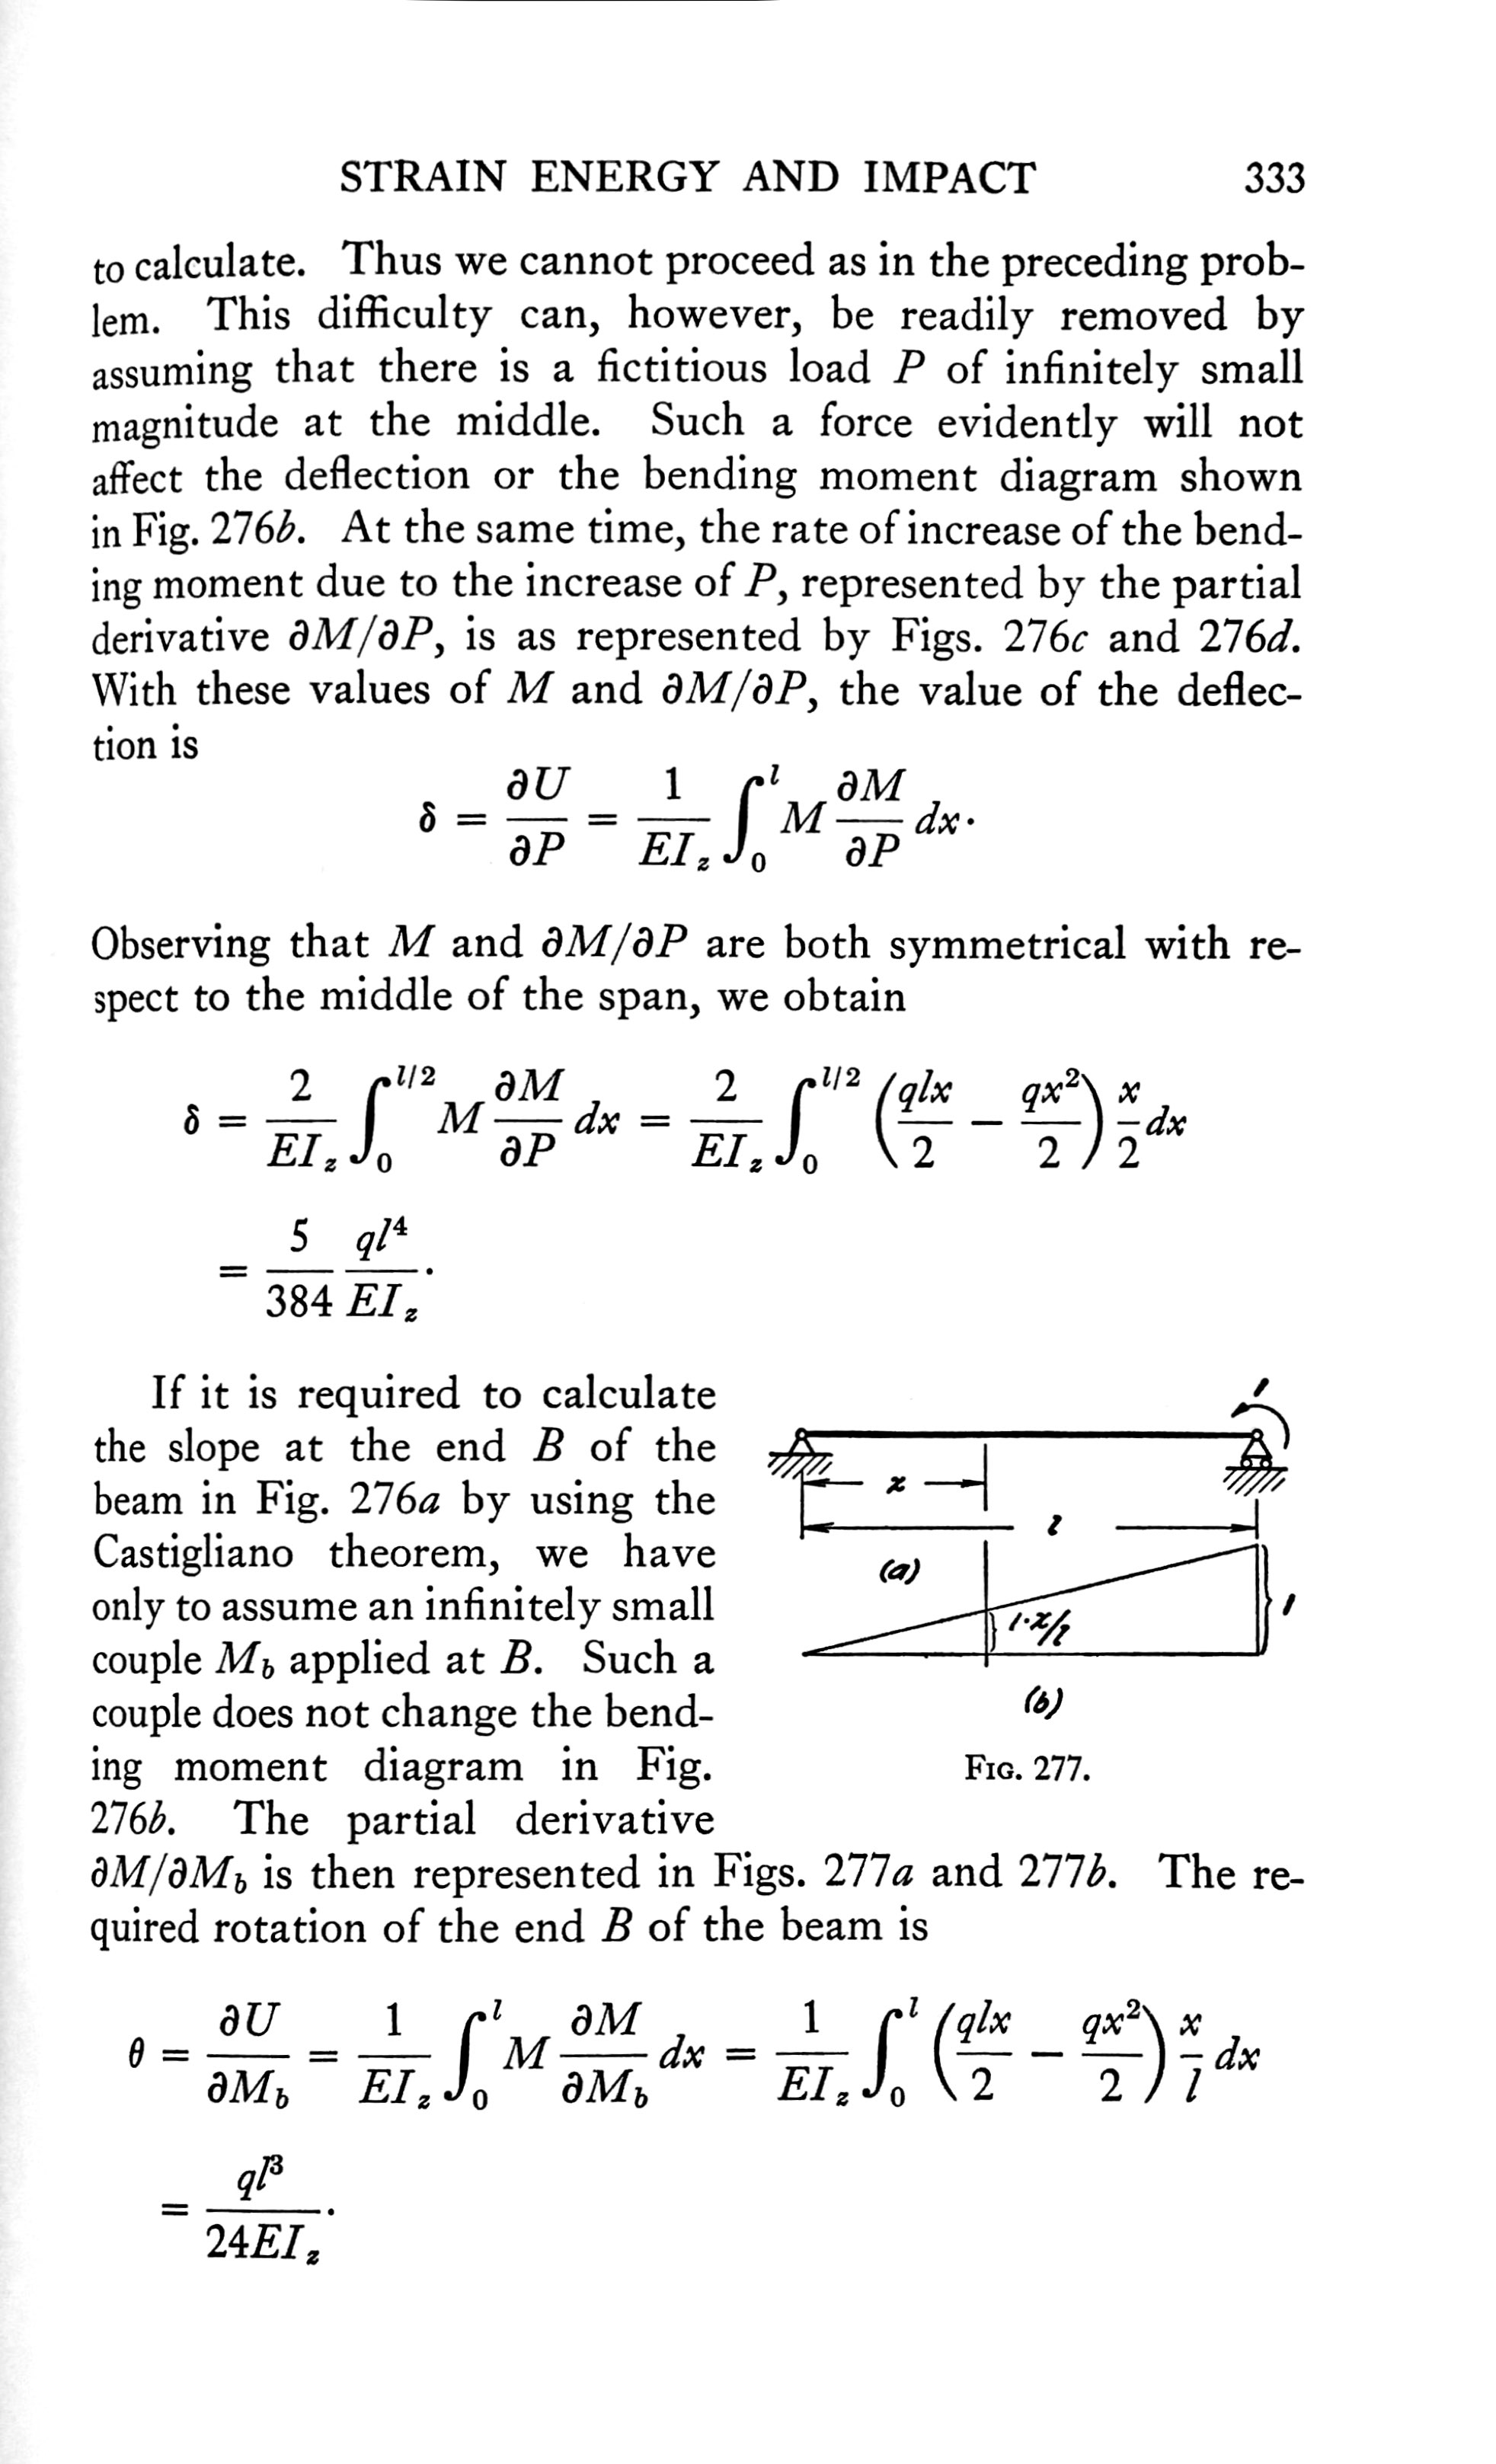 Page of equations from Timoshenko